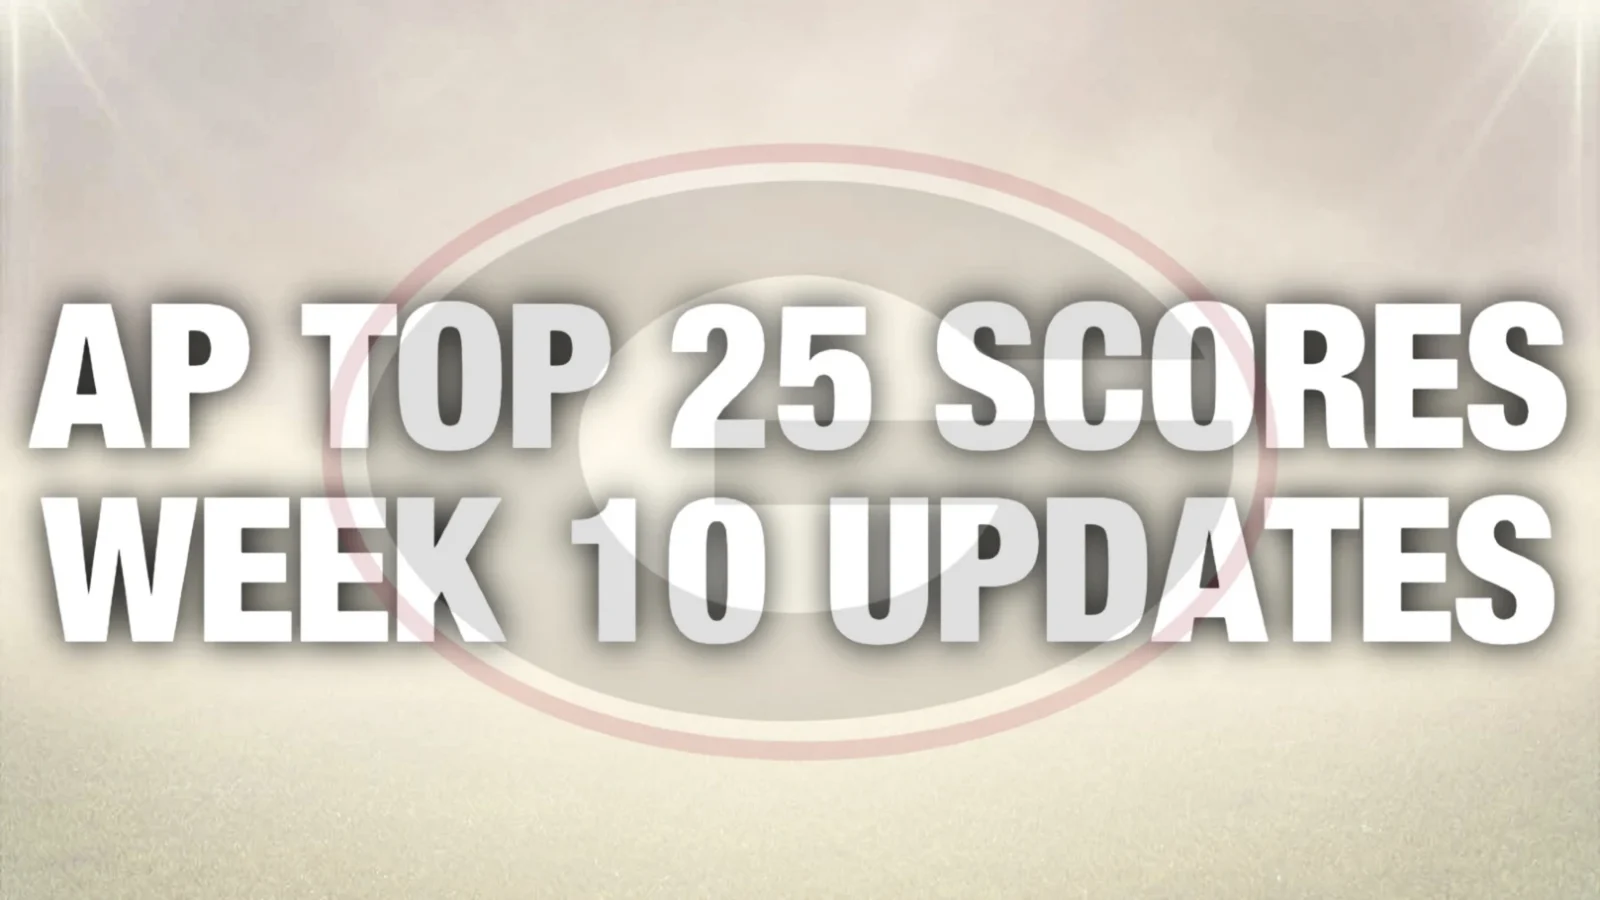 College Football AP Top 25 scores and results in Week 10